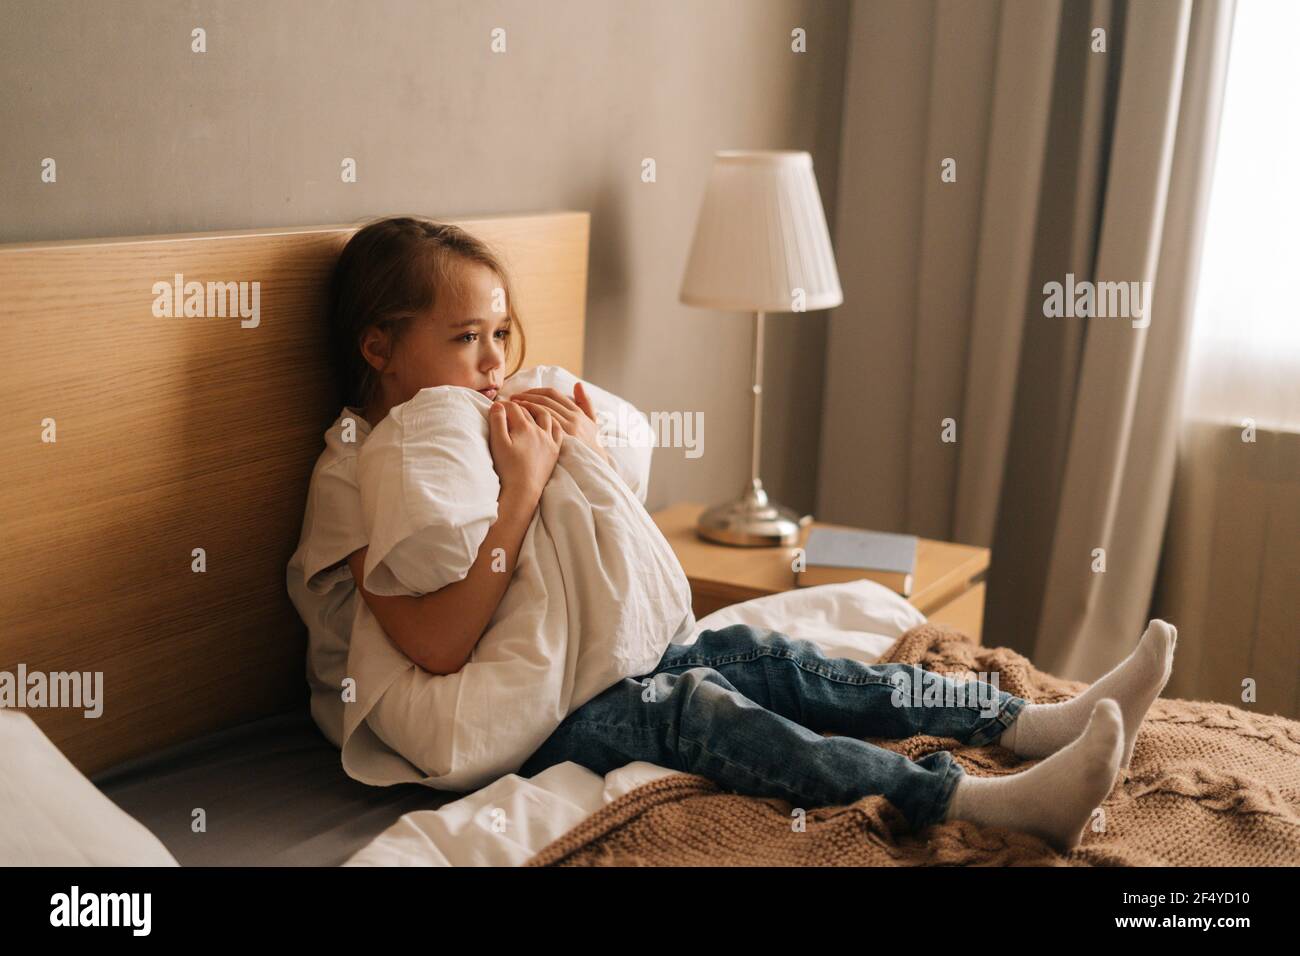 Upset little girl crying sitting alone in fetal position hiding face and rocking on bed hugging big pillow. Stock Photo